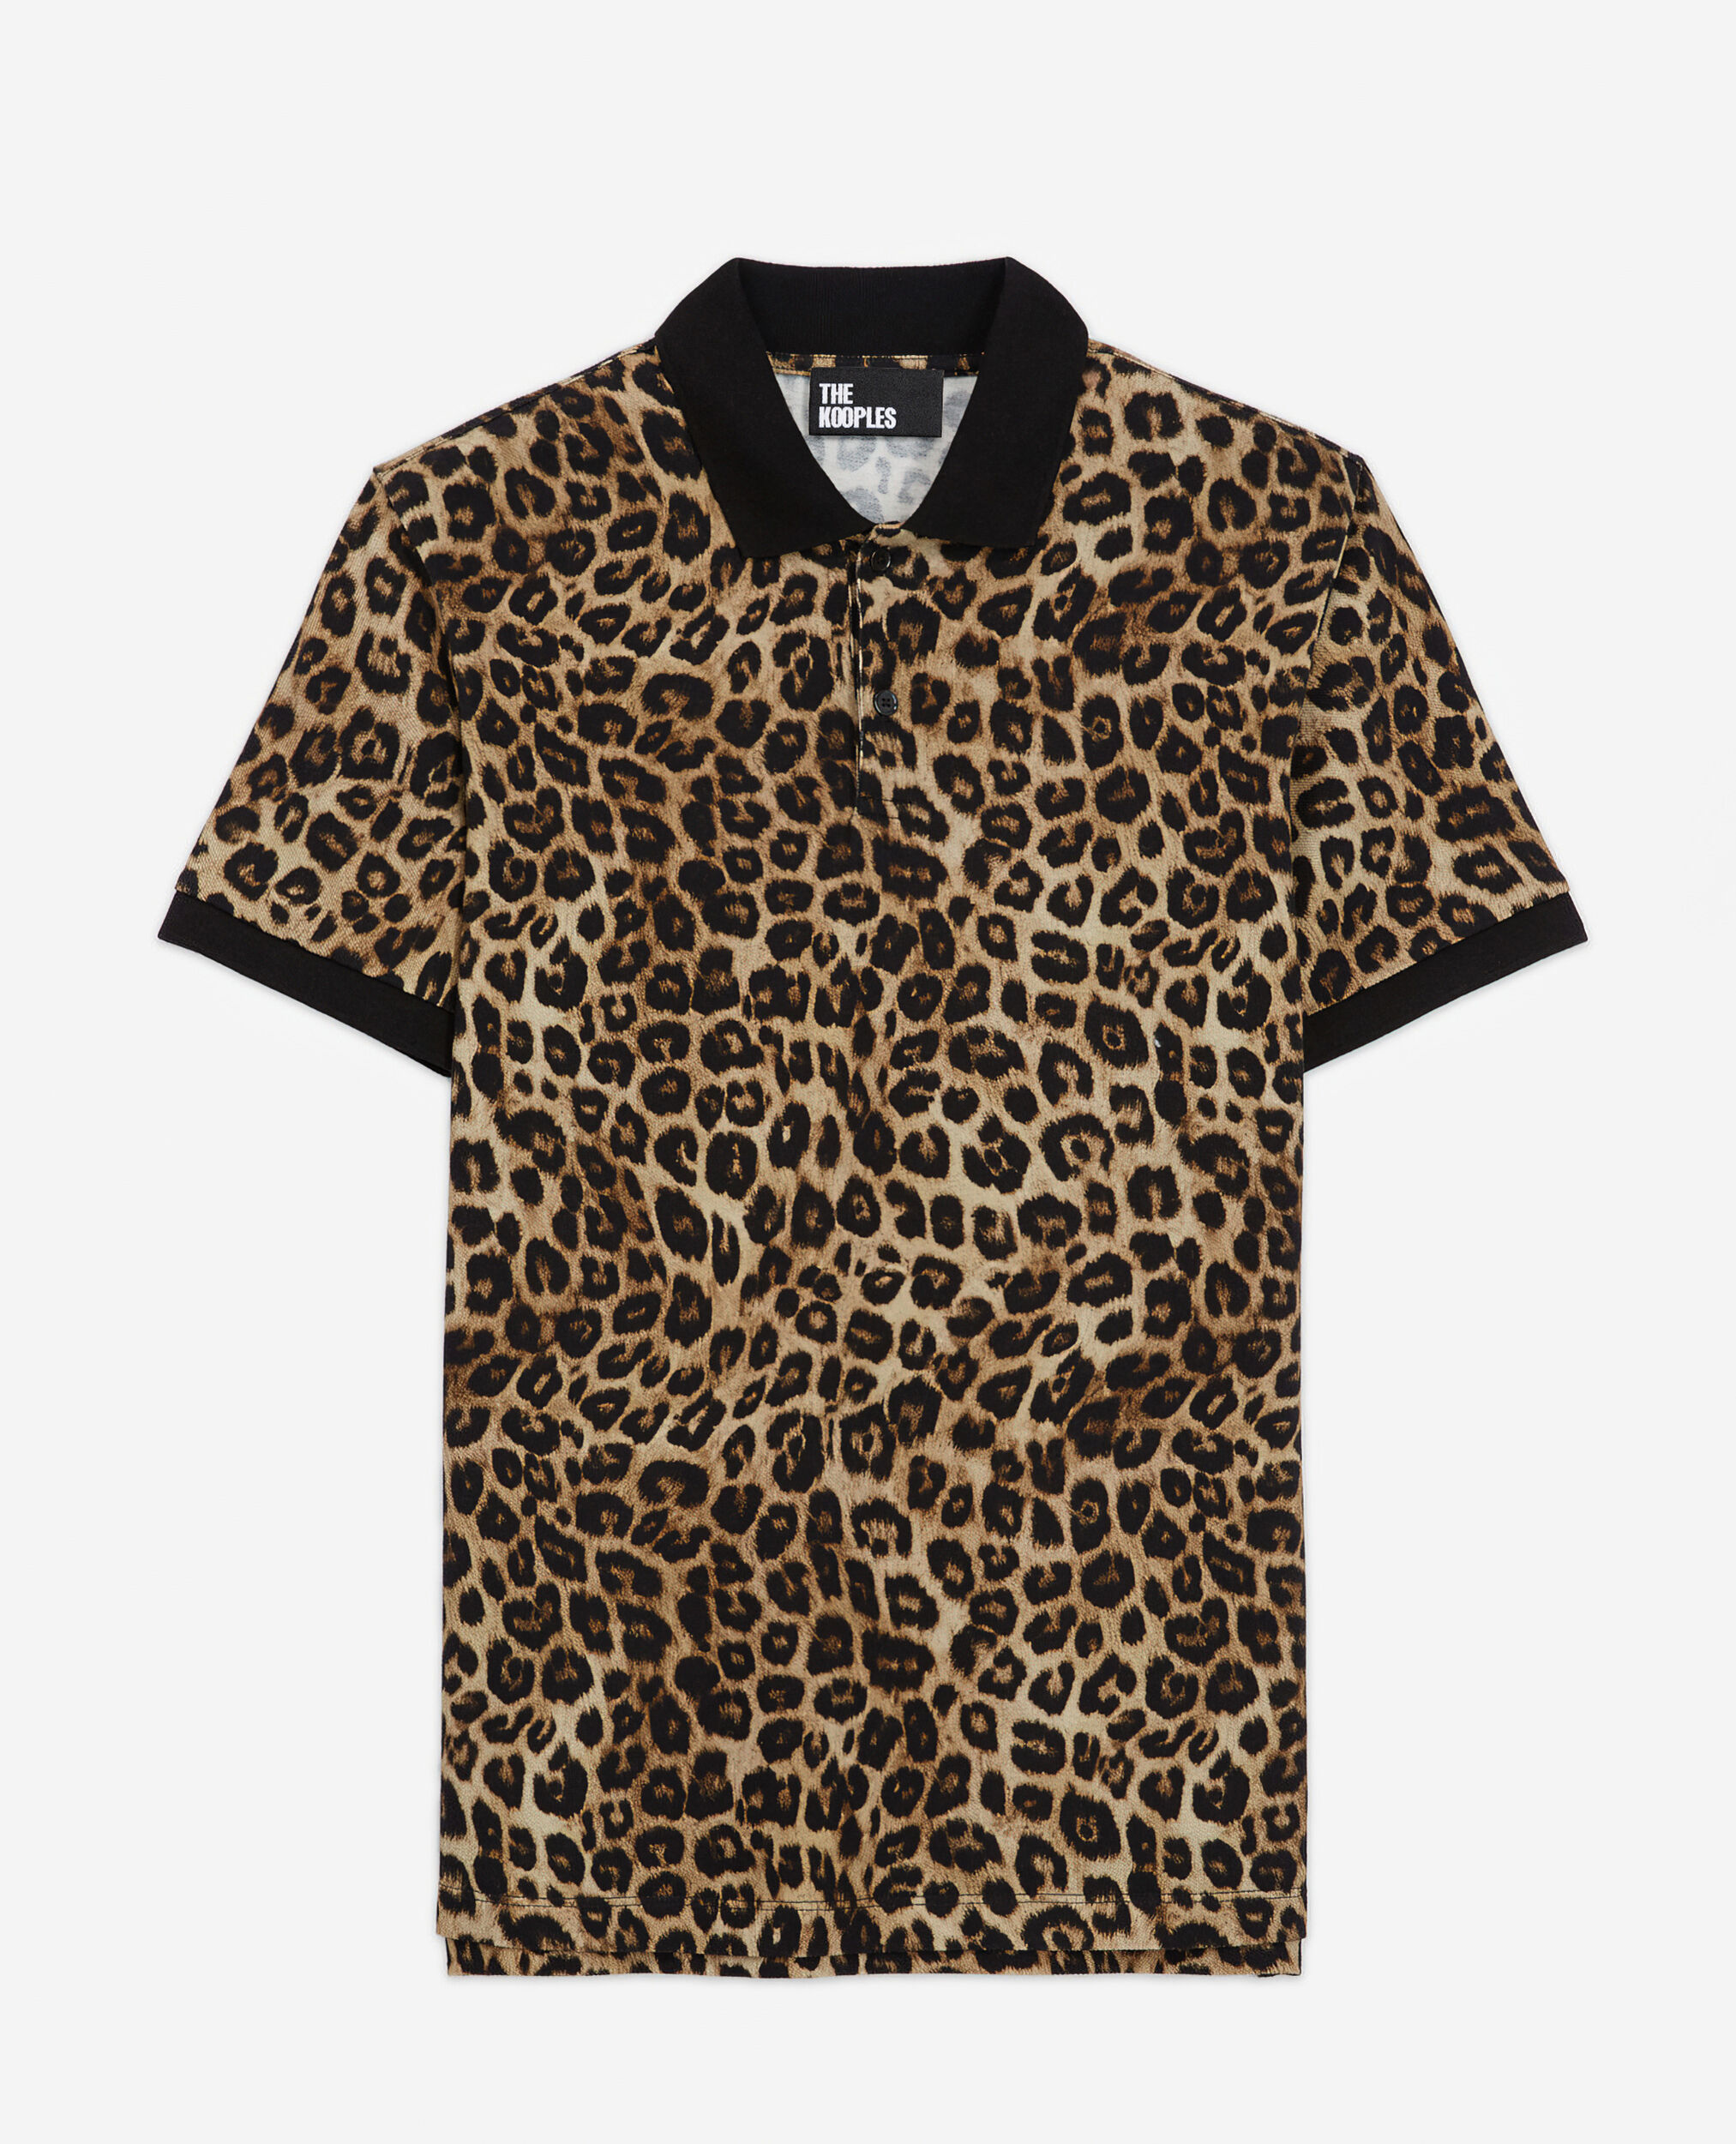 Poloshirt mit Leopardenmuster, LEOPARD, hi-res image number null